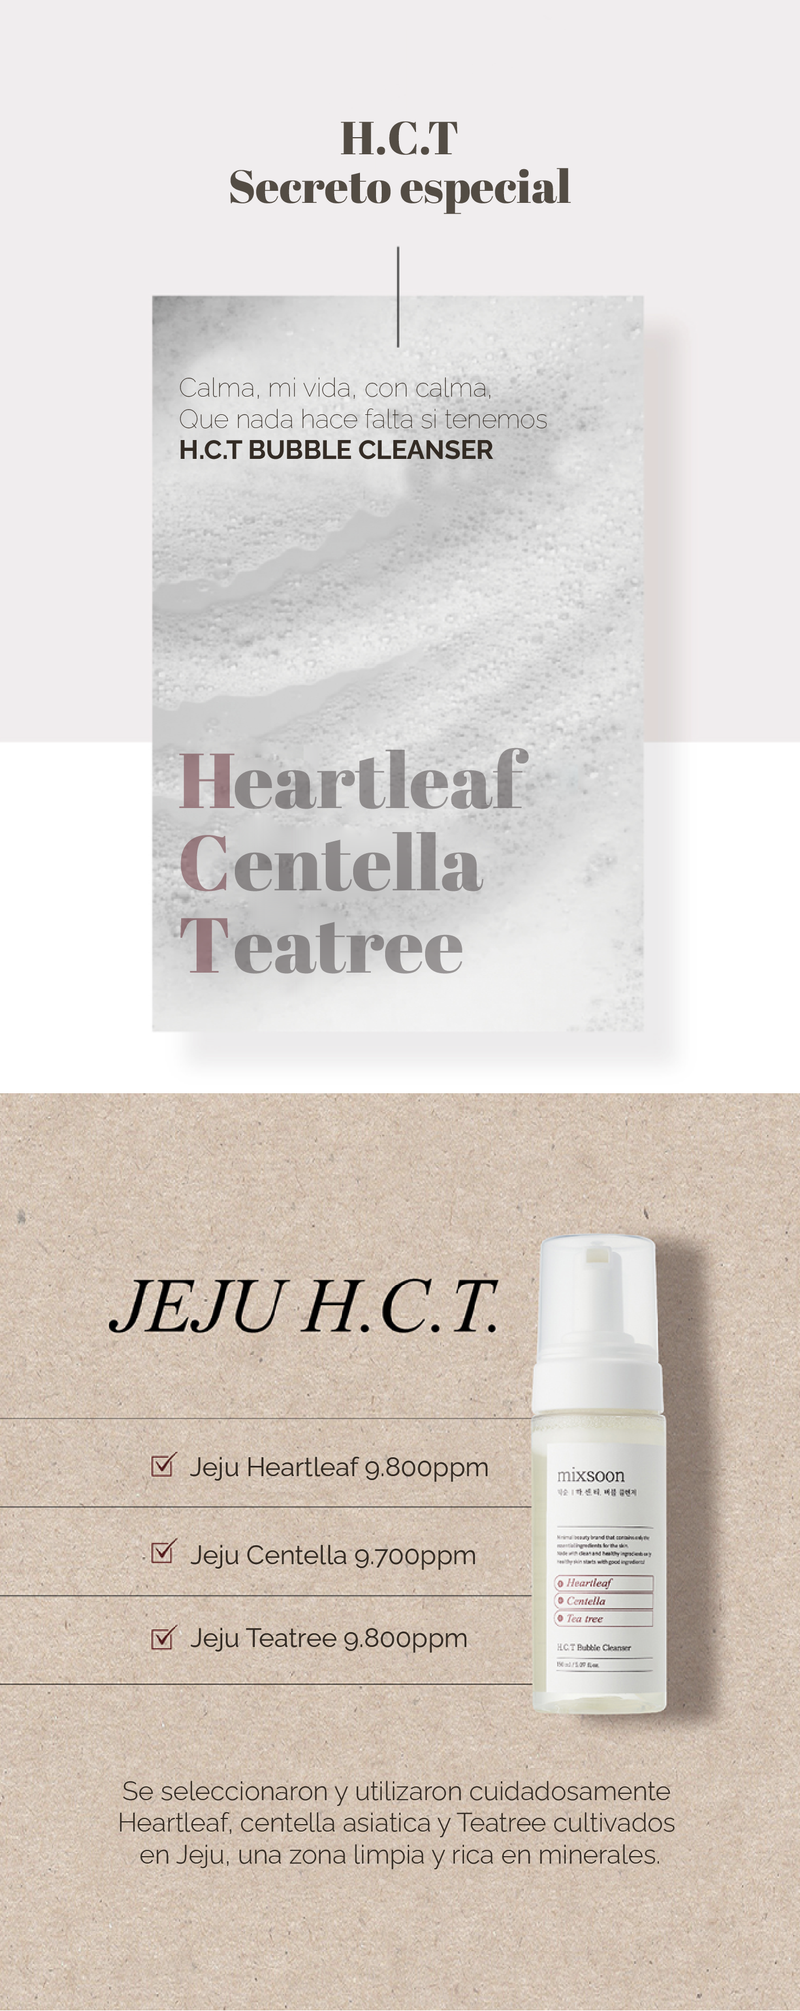 MIXSOON HCT Bubble Cleanser